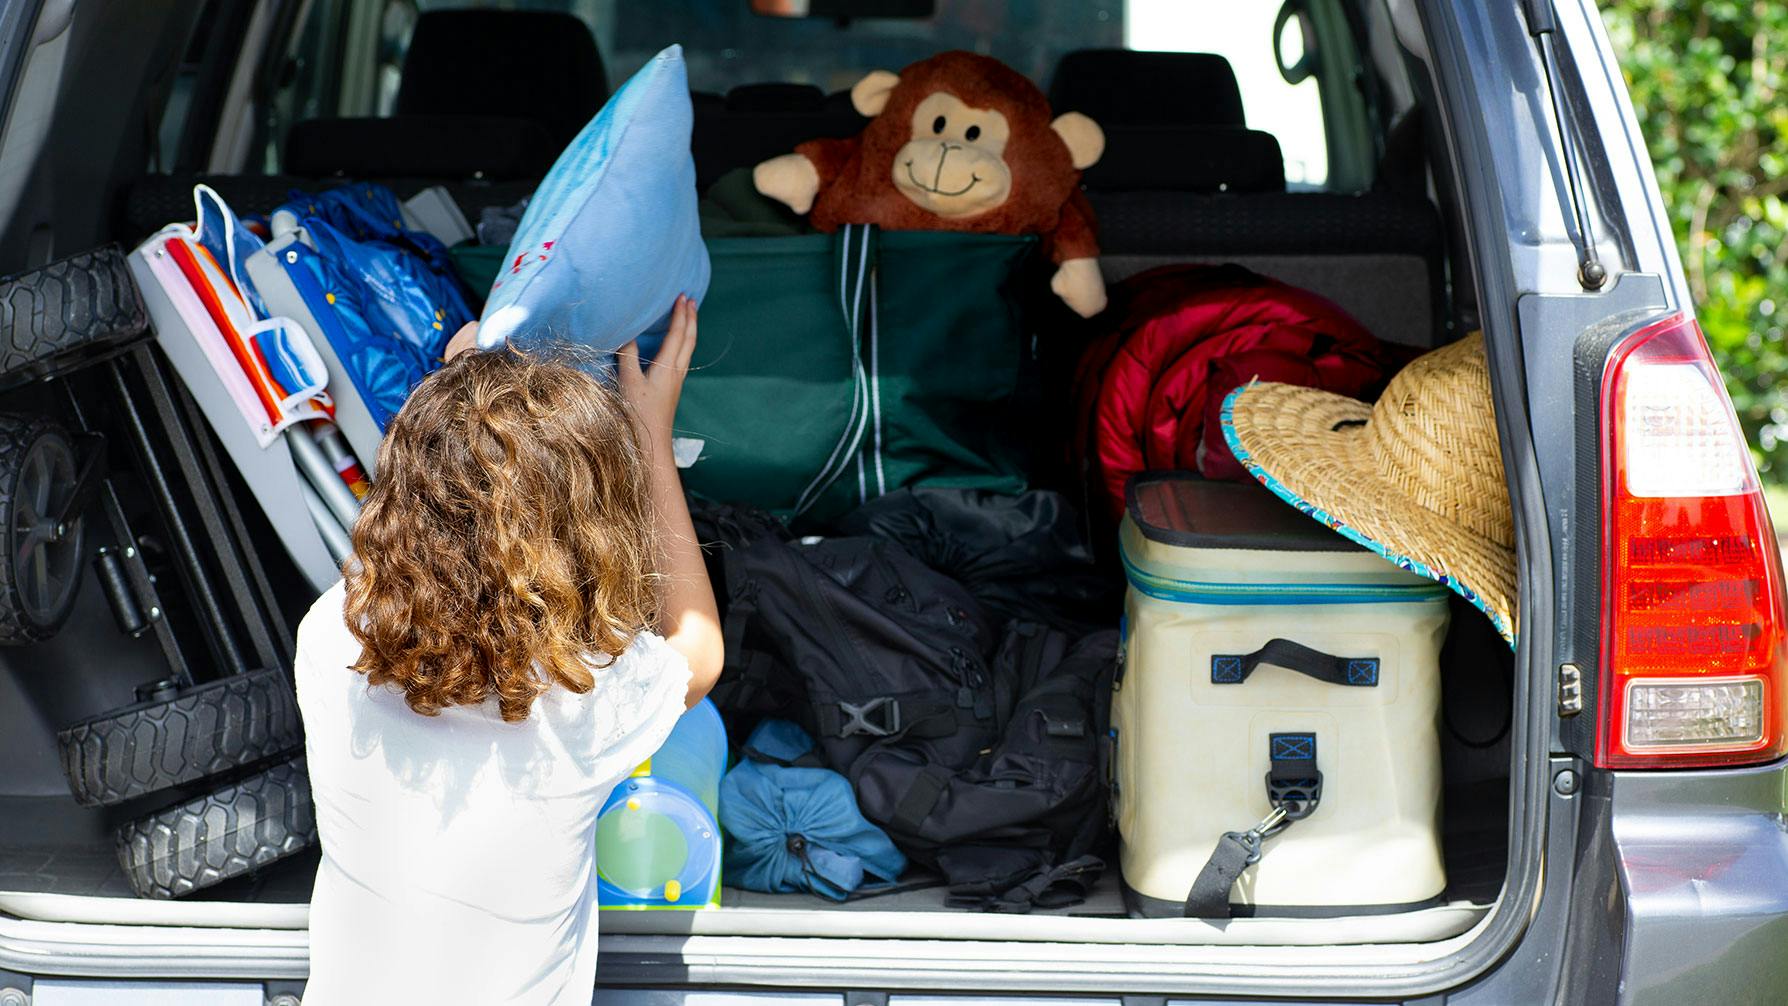 Kid packing up car for camping